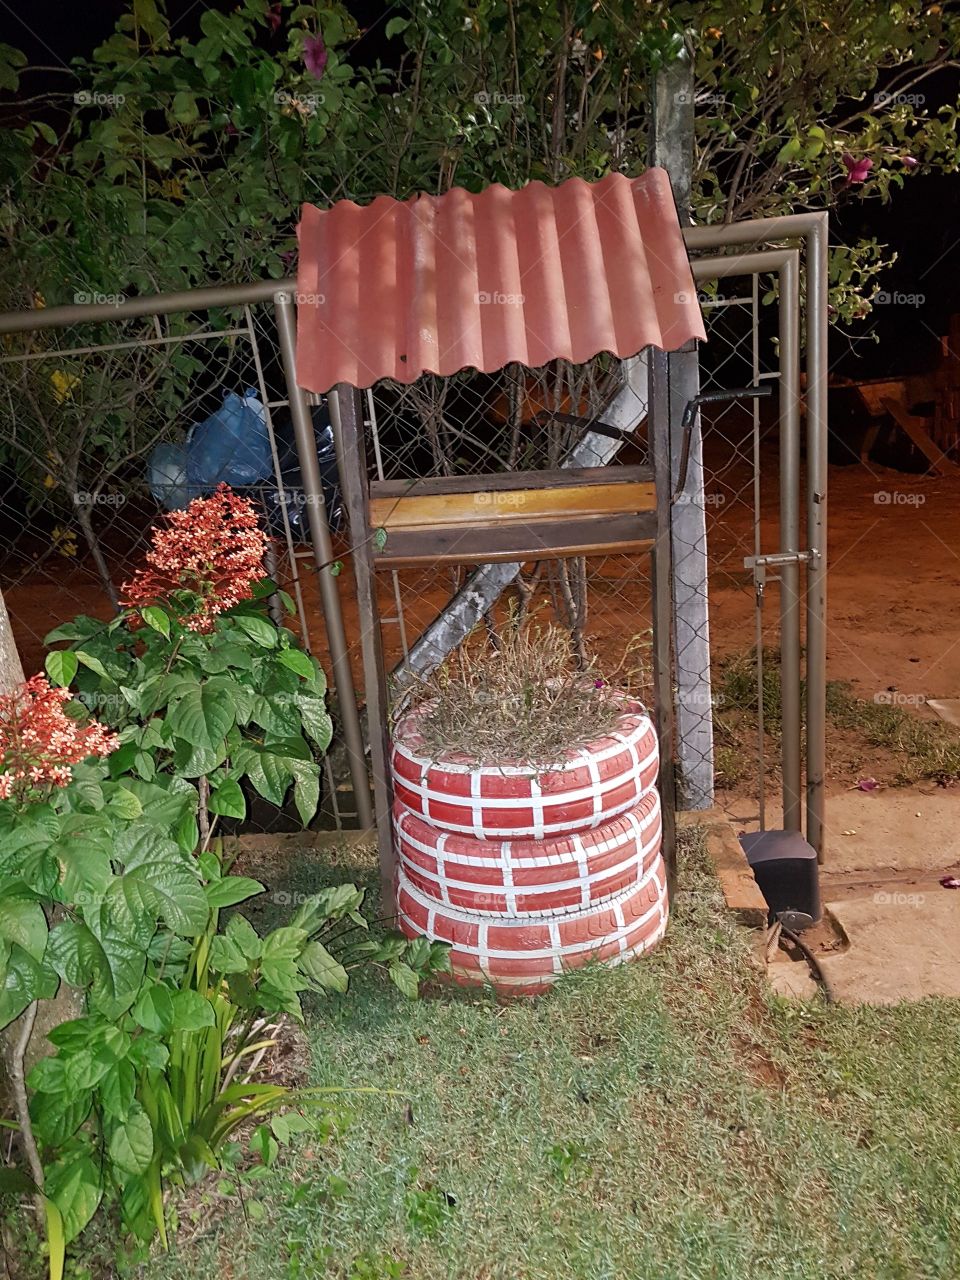 Ideas for decoration. Water well in my uncle's farm.